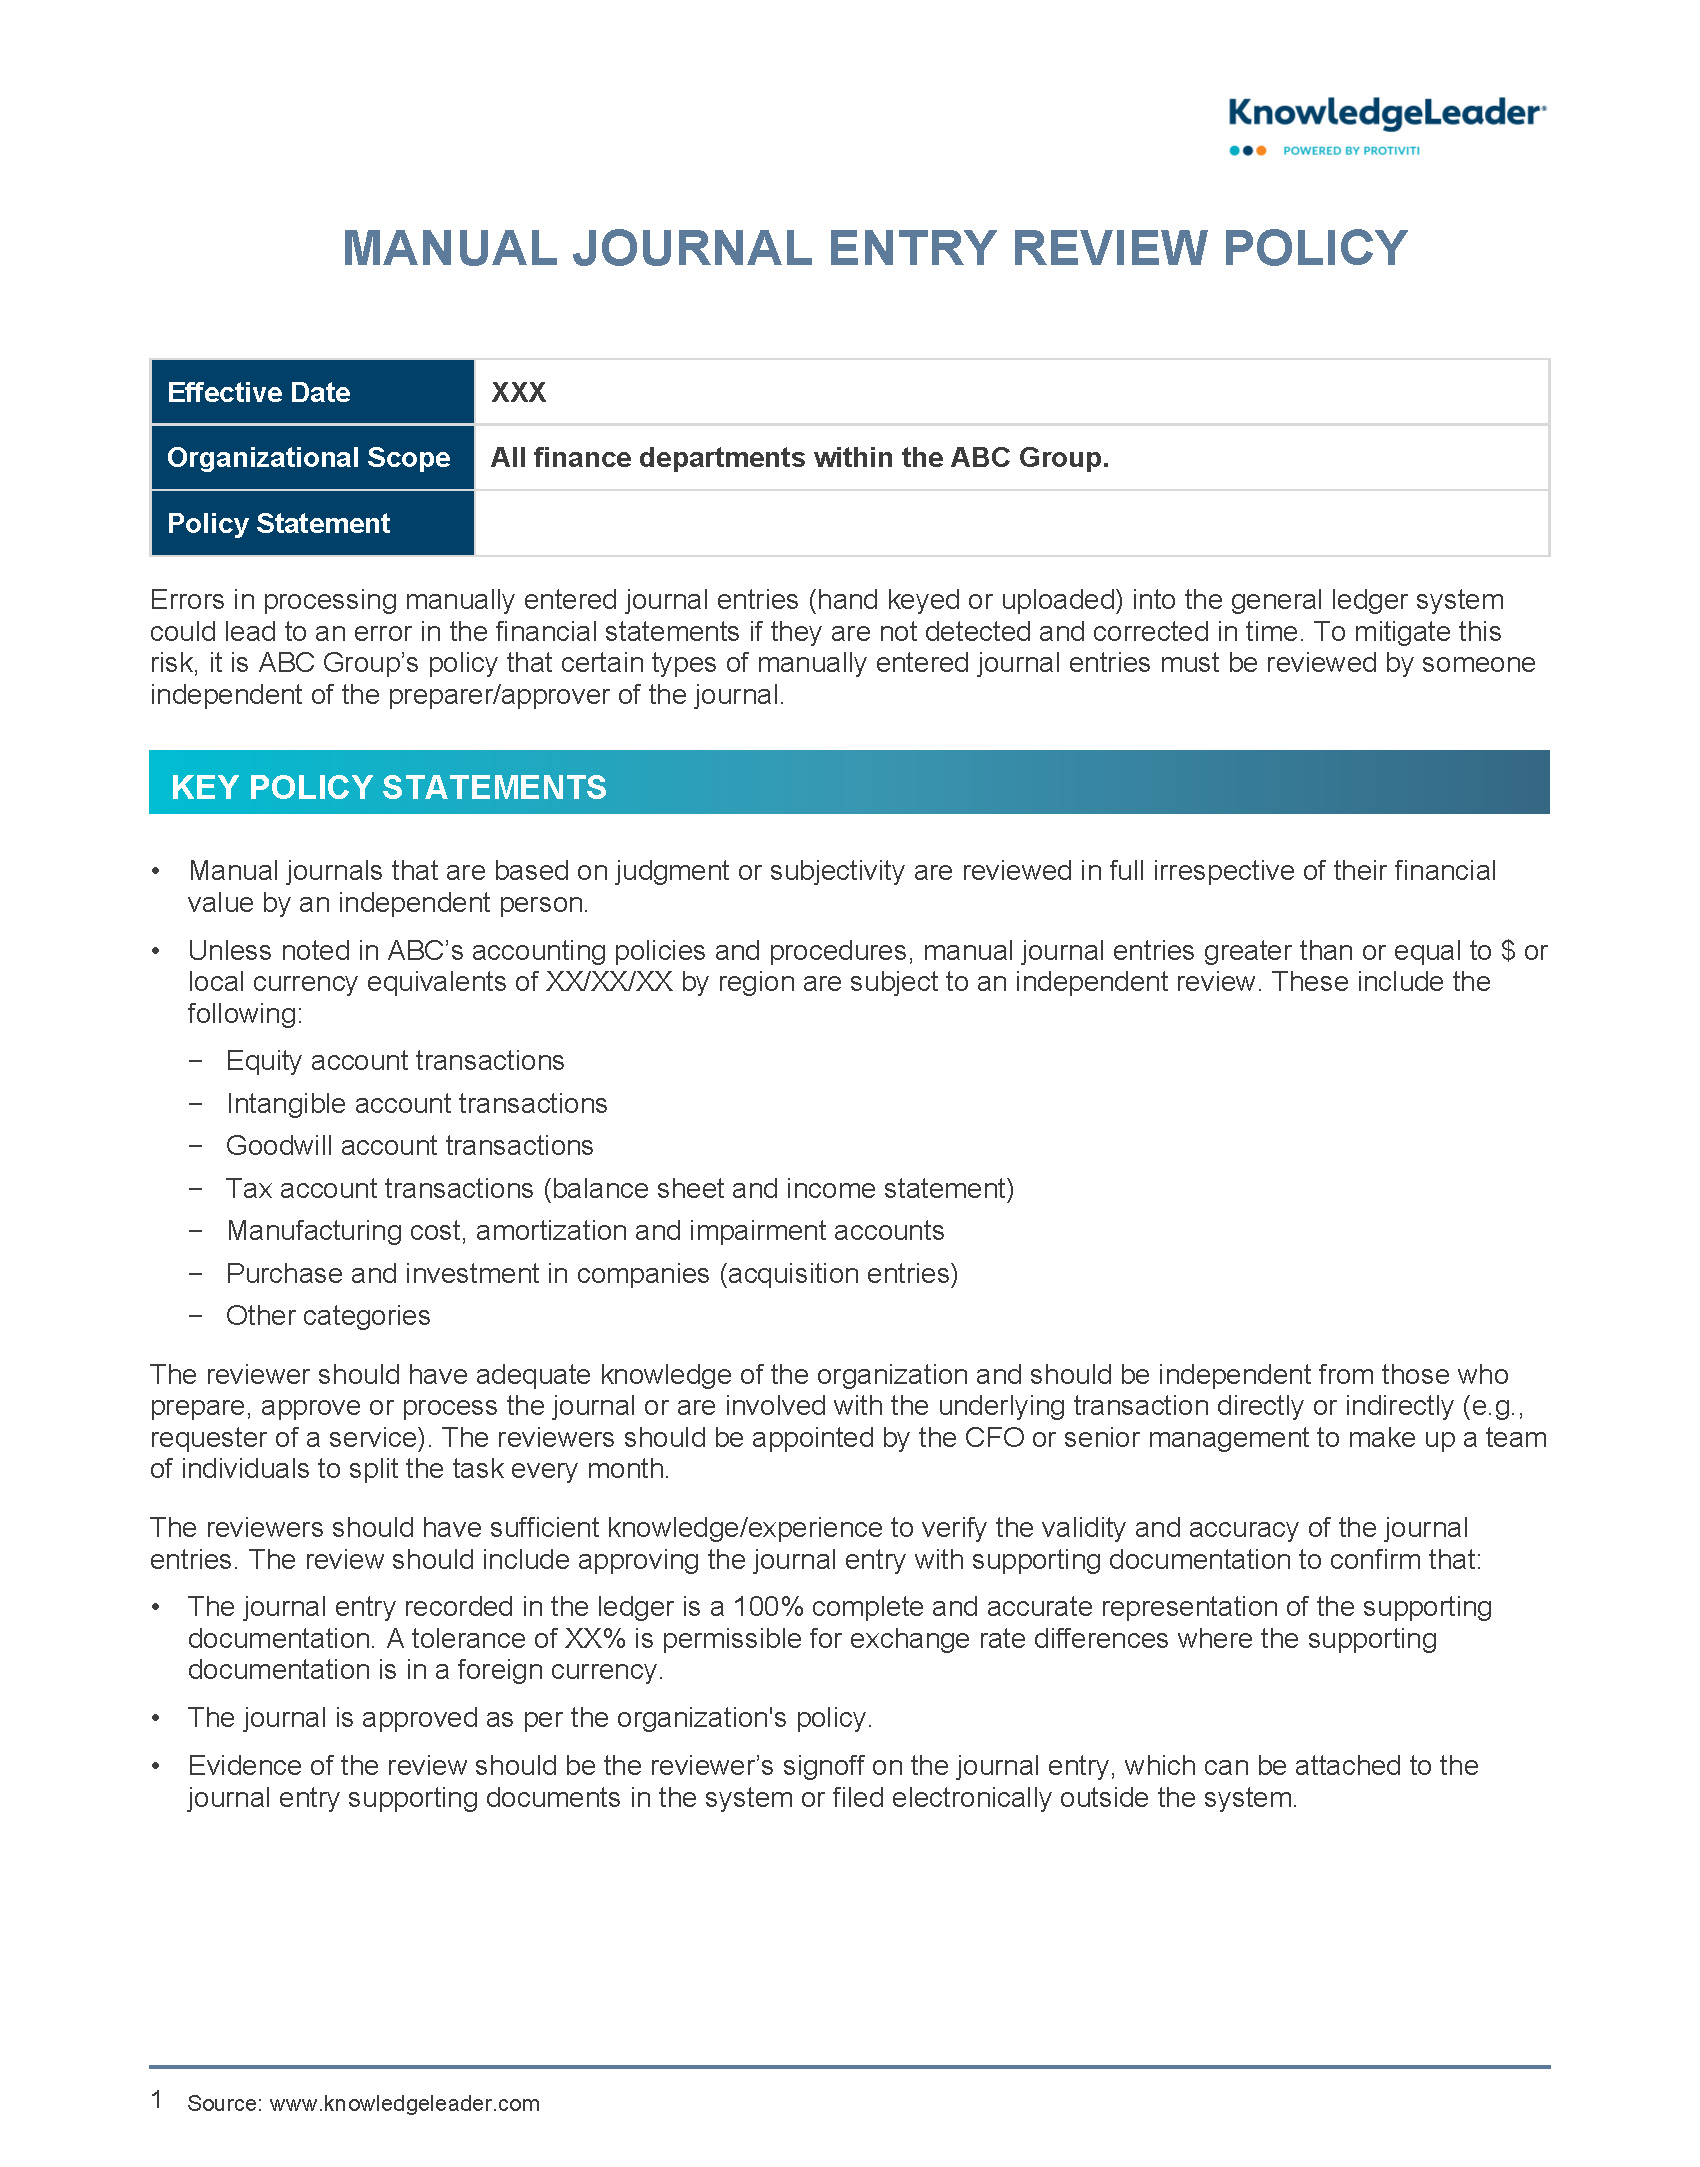 Manual Journal Entry Review Policy